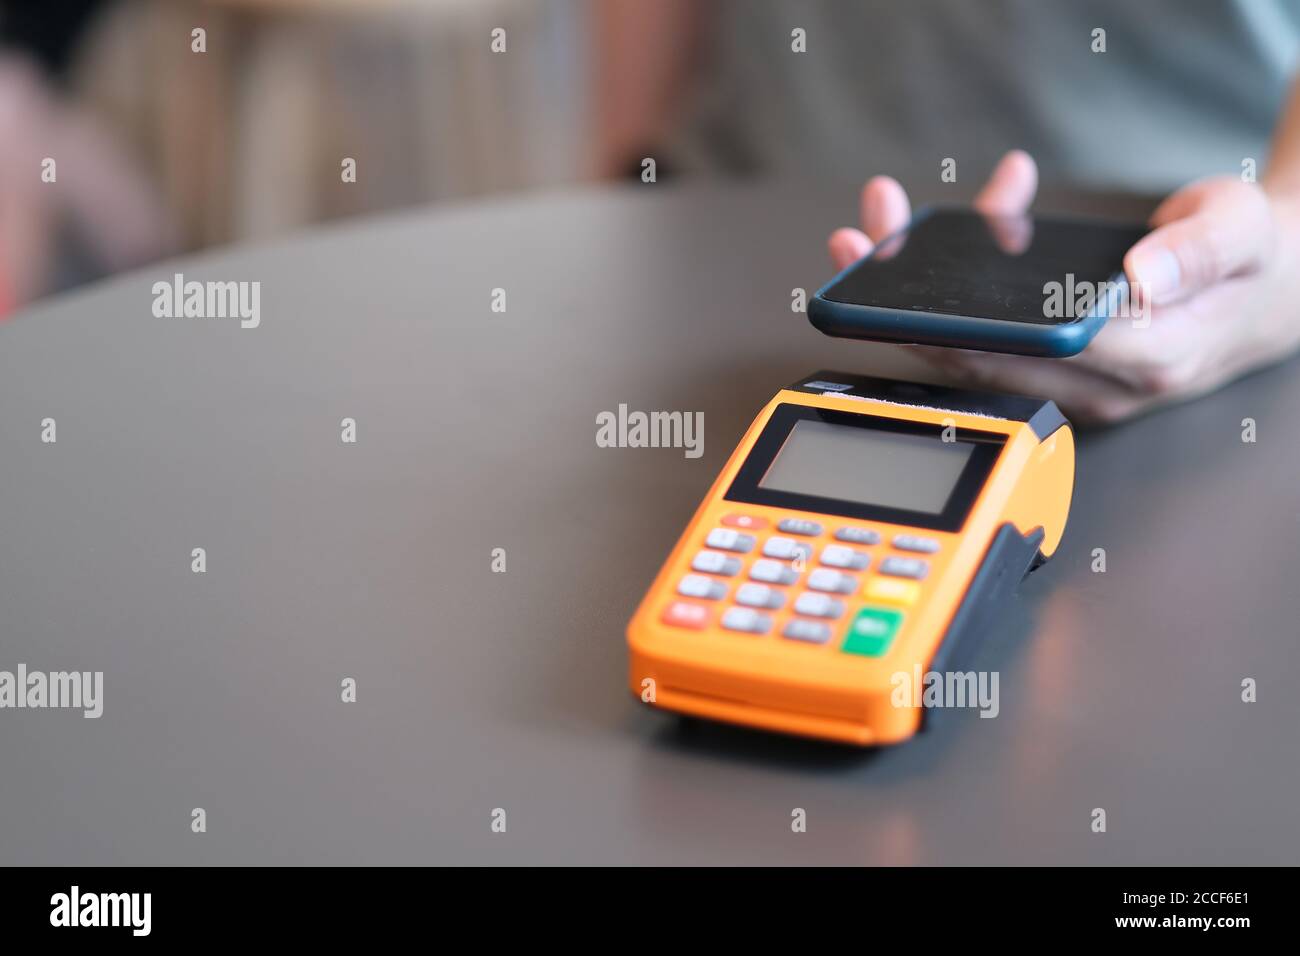 close up hand holding smartphone over pos terminal on table. blur background Stock Photo